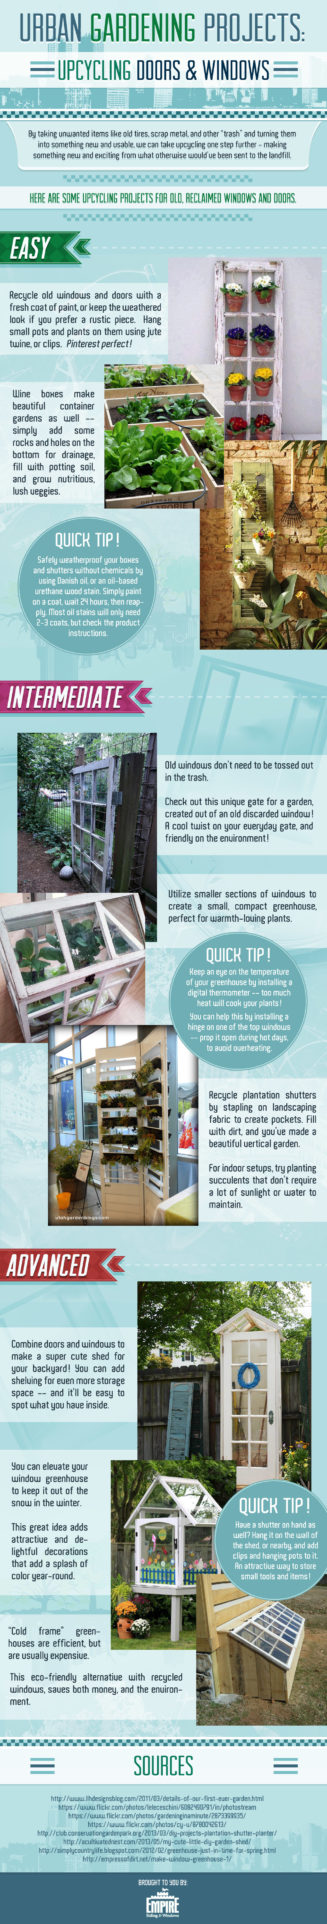 Urban Gardening Projects: Upcycling Old Doors & Windows